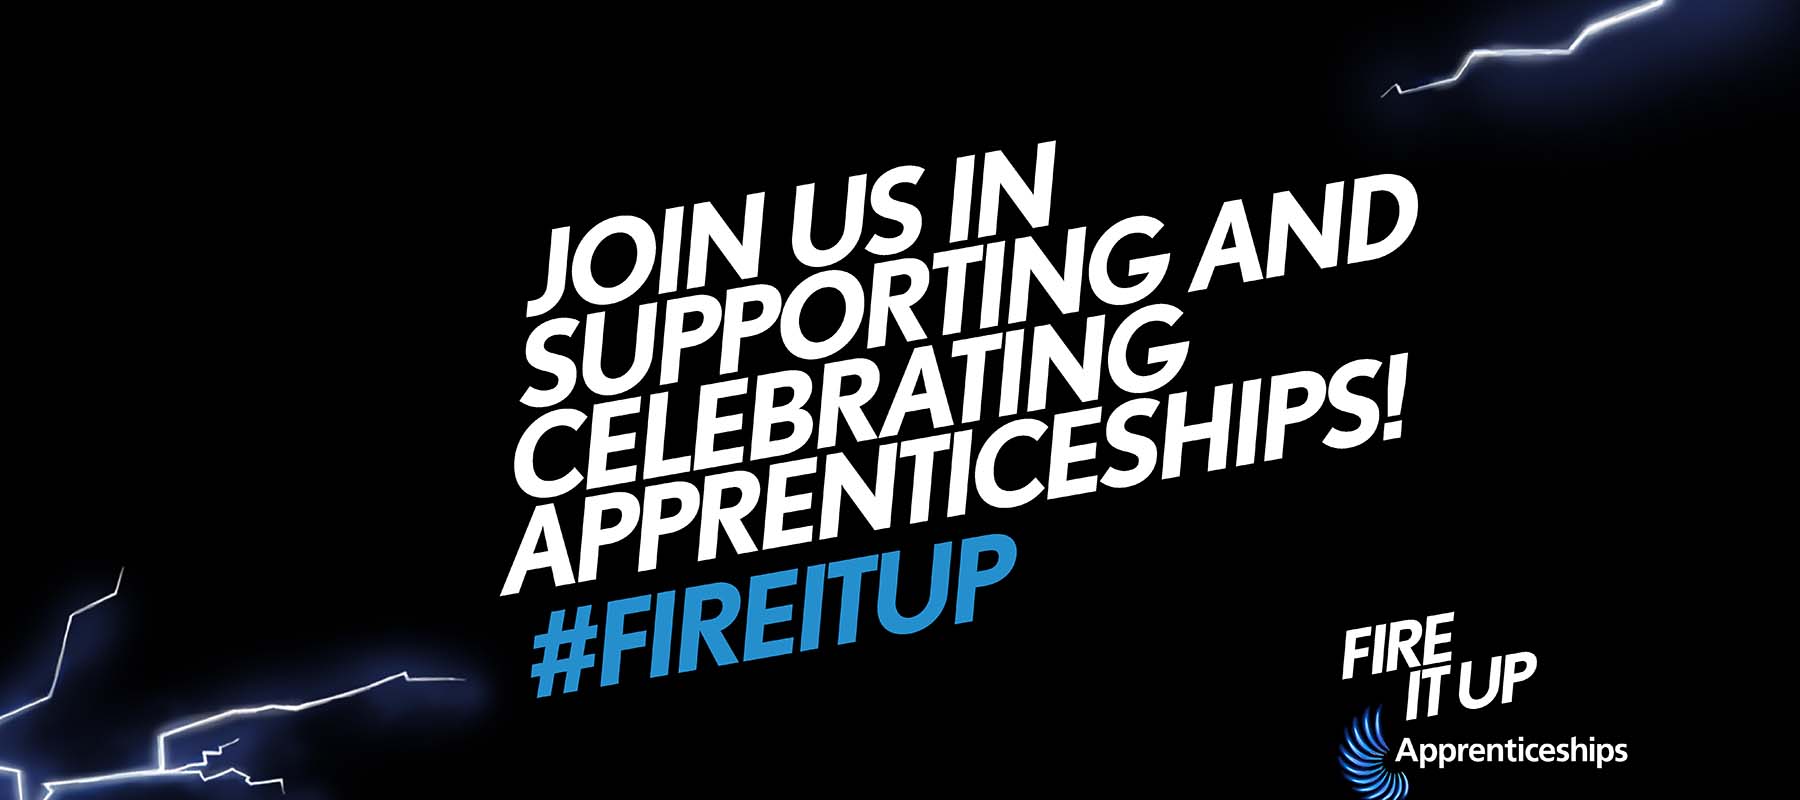 Fire it up National Apprenticeship campaign banner reads 'Join us in supporting and celebrating apprenticeships #fire it up'